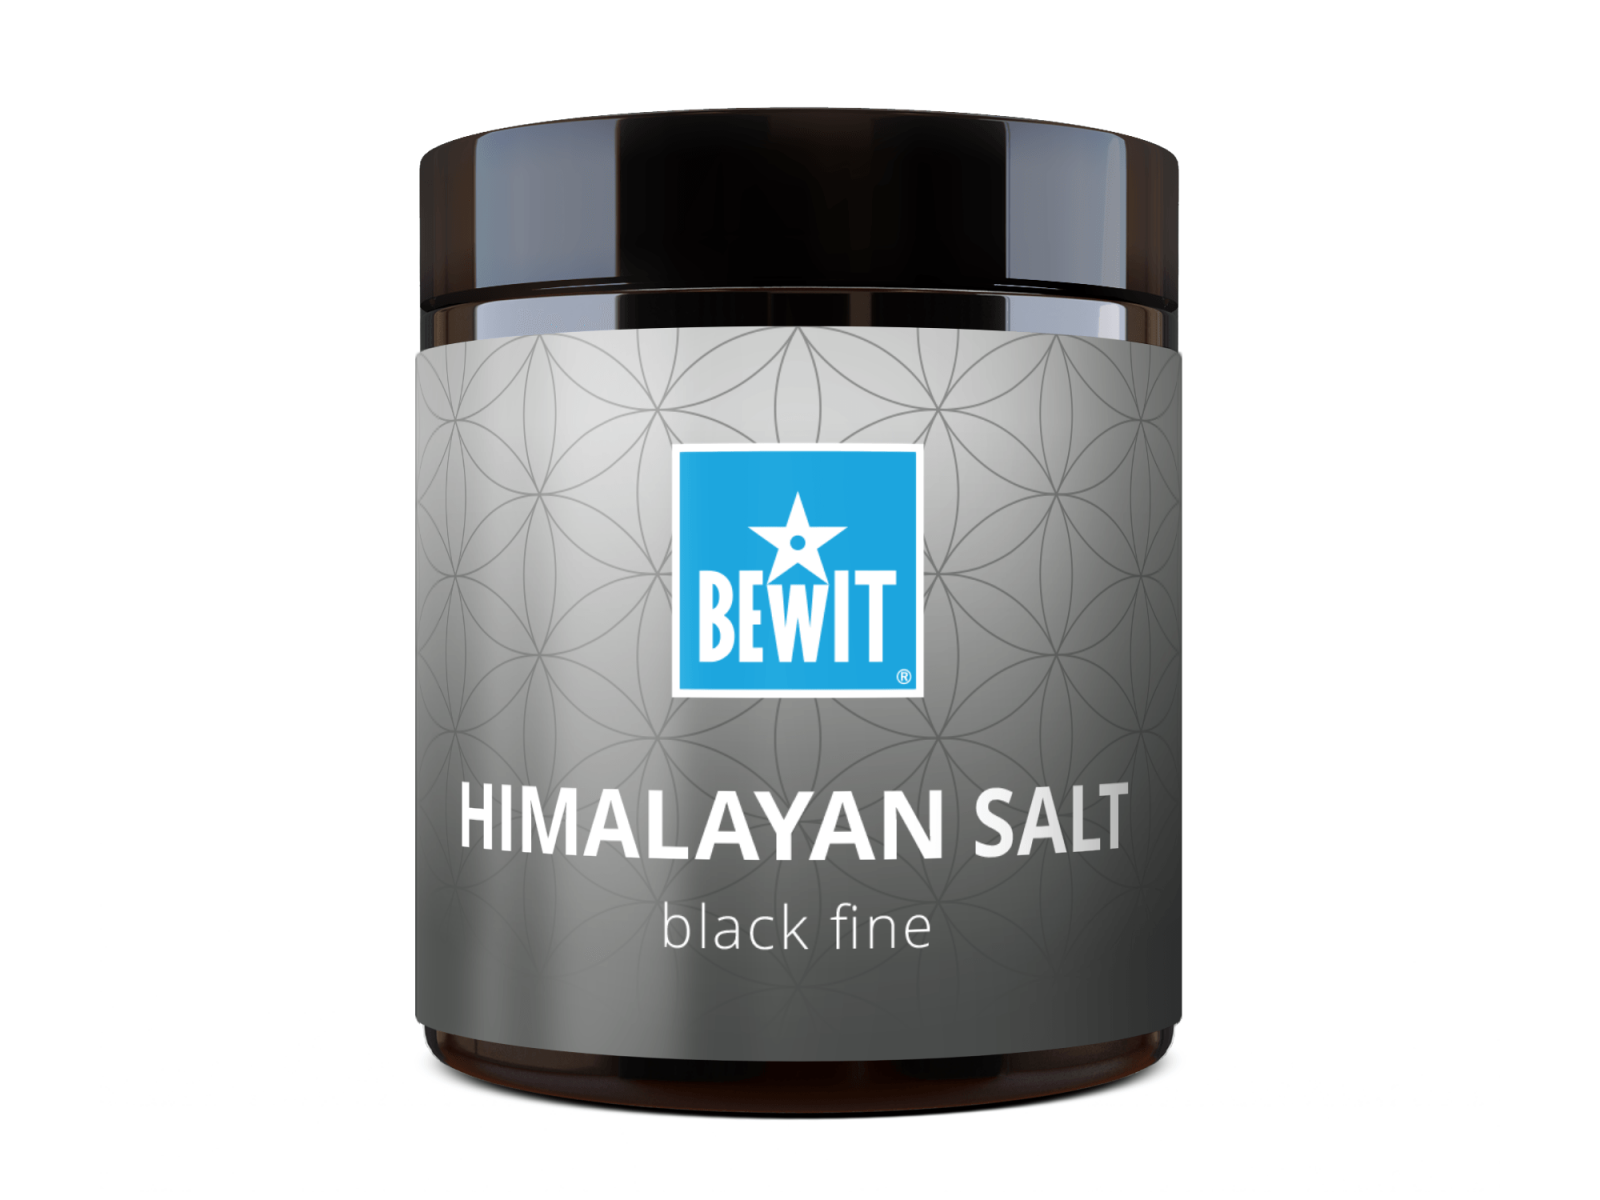 BEWIT Himalayan black salt, finely ground - A superfood - 2